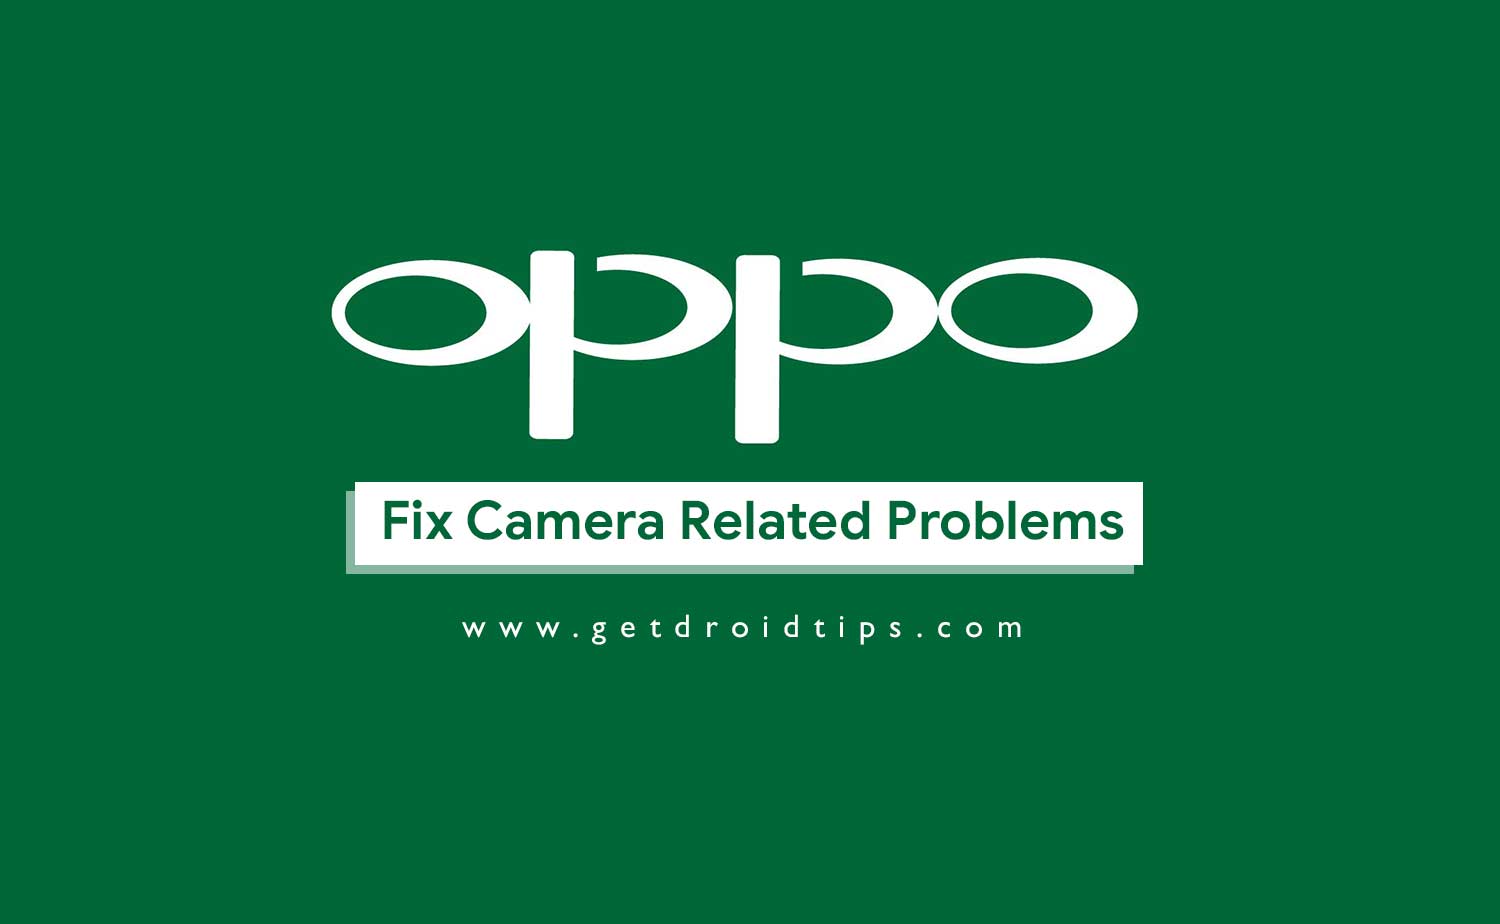 A Guide To Fix Camera Related Problems On An OPPO Phone